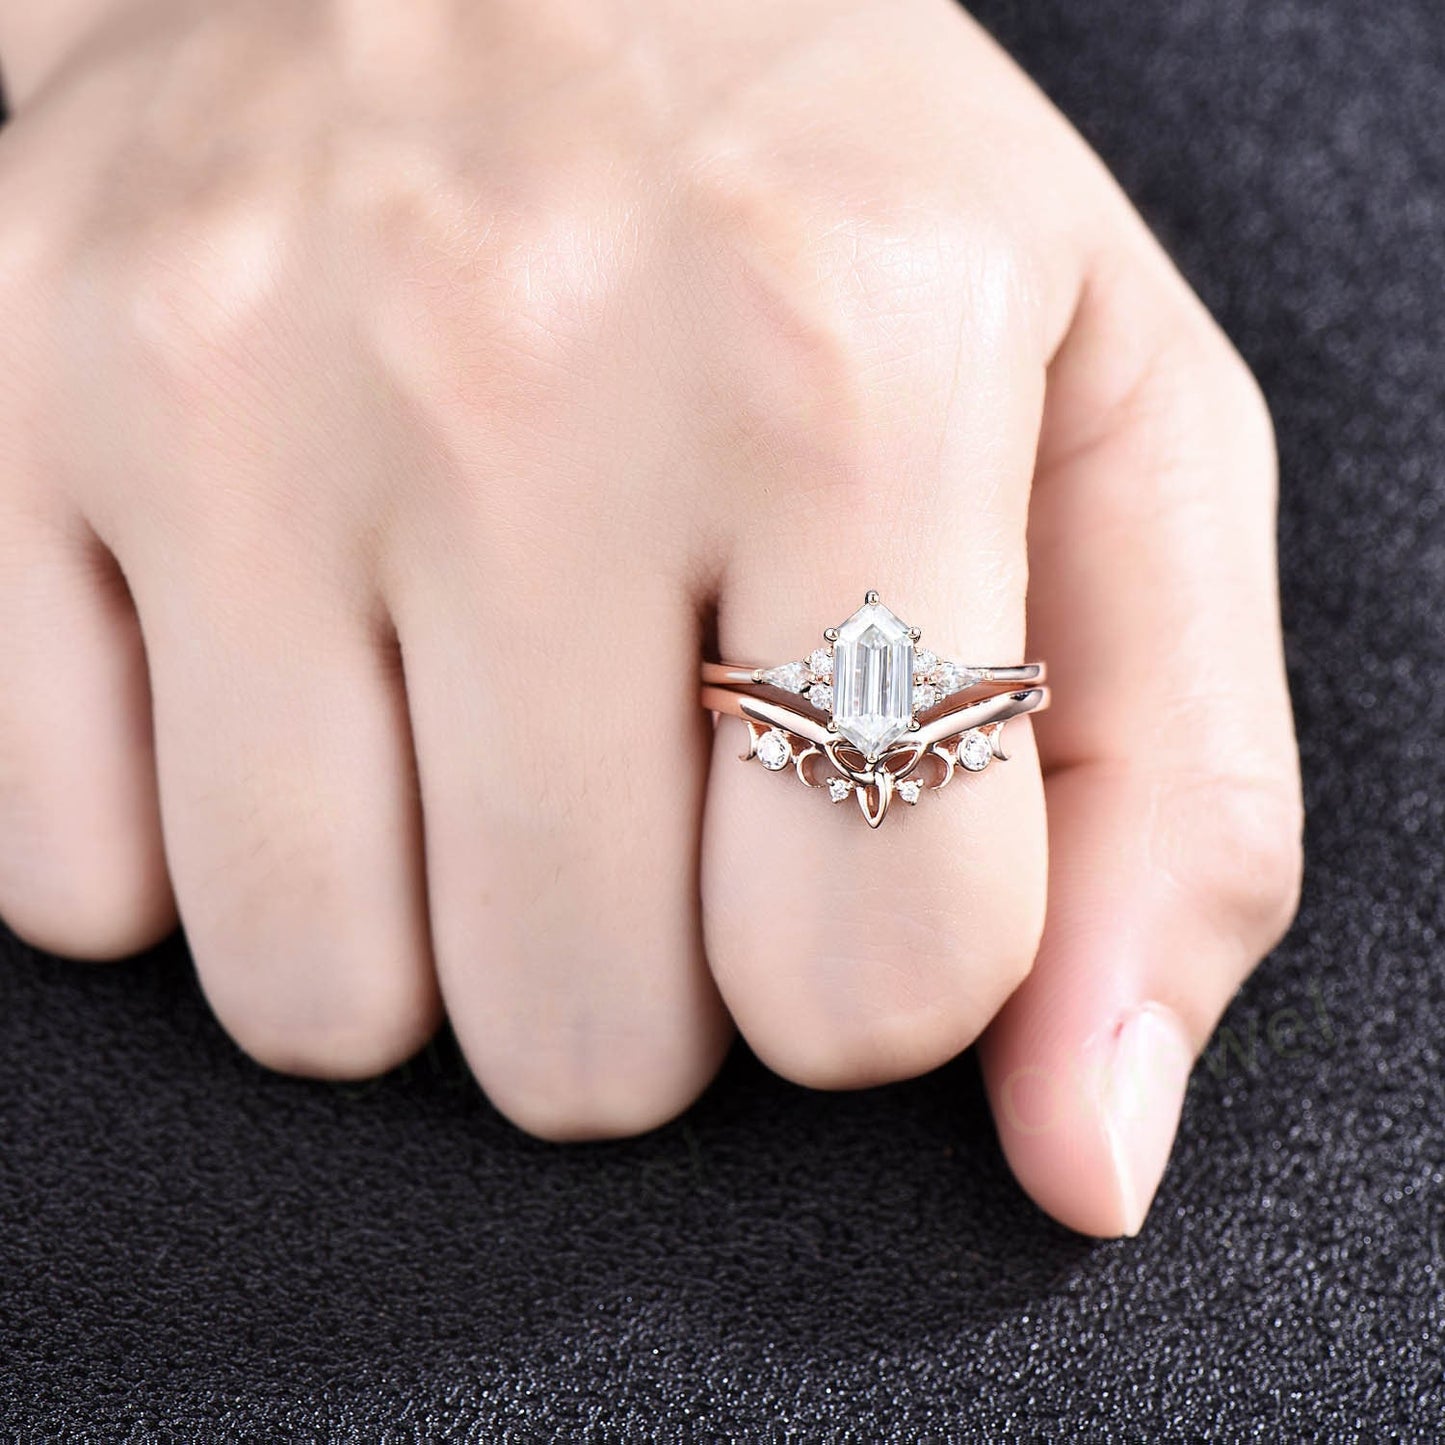 Vintage Hexagon cut Moissanite engagement ring set 14k rose gold unique anniversary ring set women dainty 6 prong kite cut ring jewelry